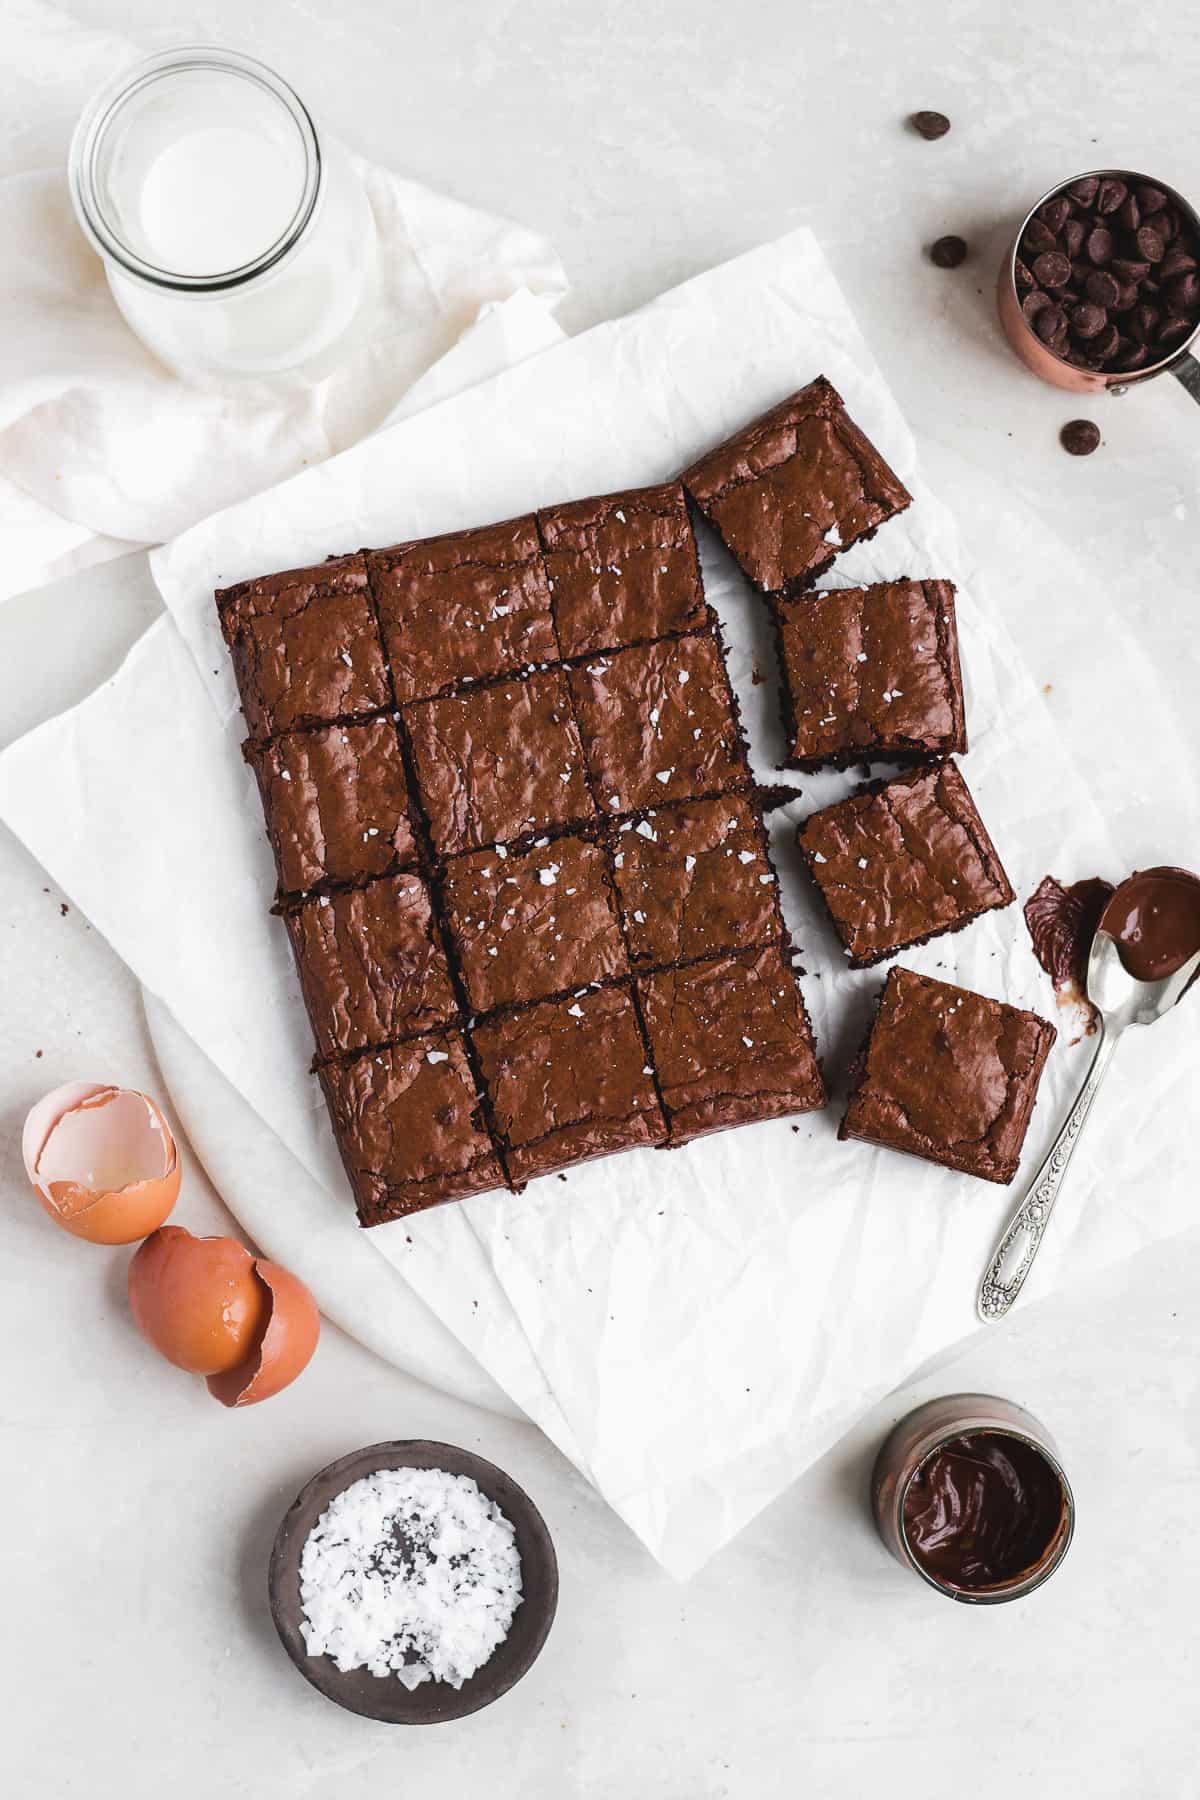 Brownies sliced into squares on a white surface with melted chocolate on the side.